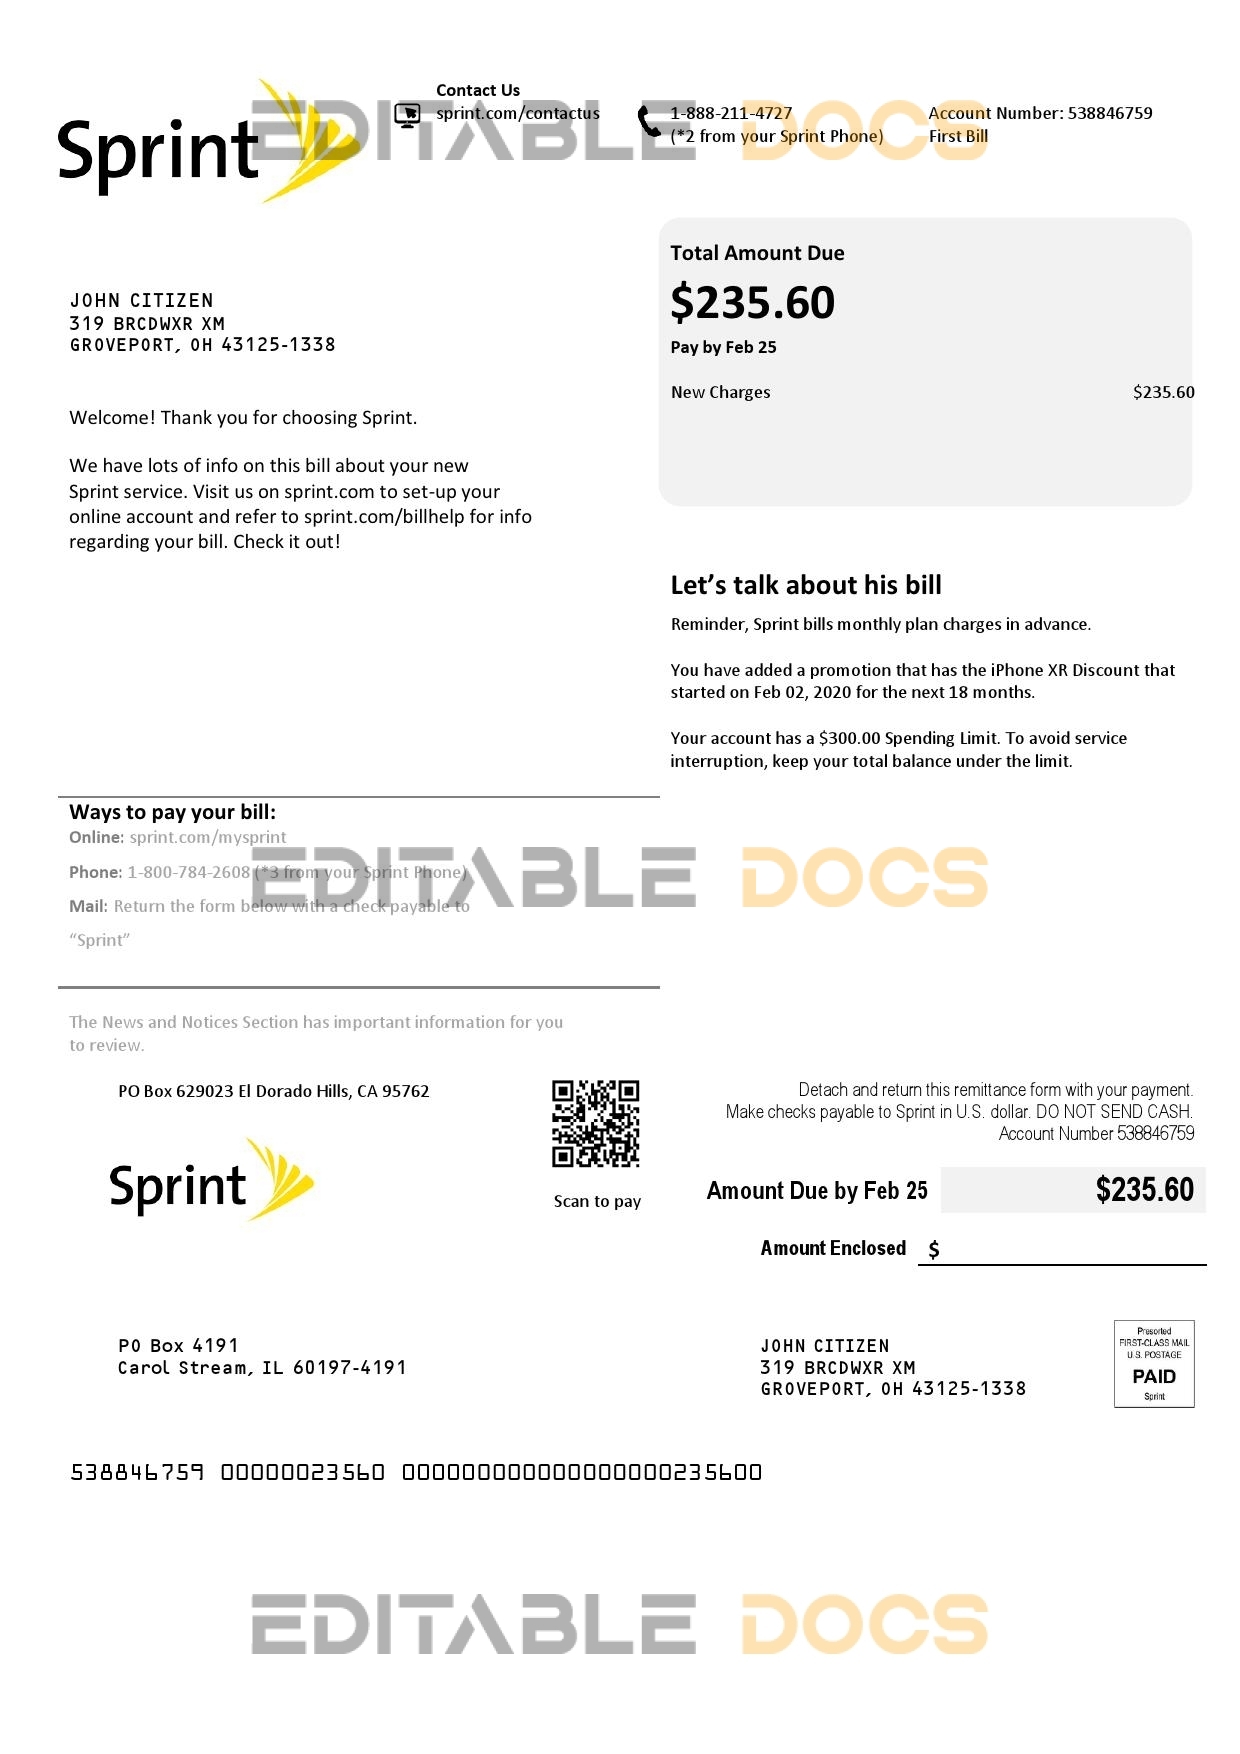 USA Sprint (T-Mobile) utility bill template in Word and PDF format